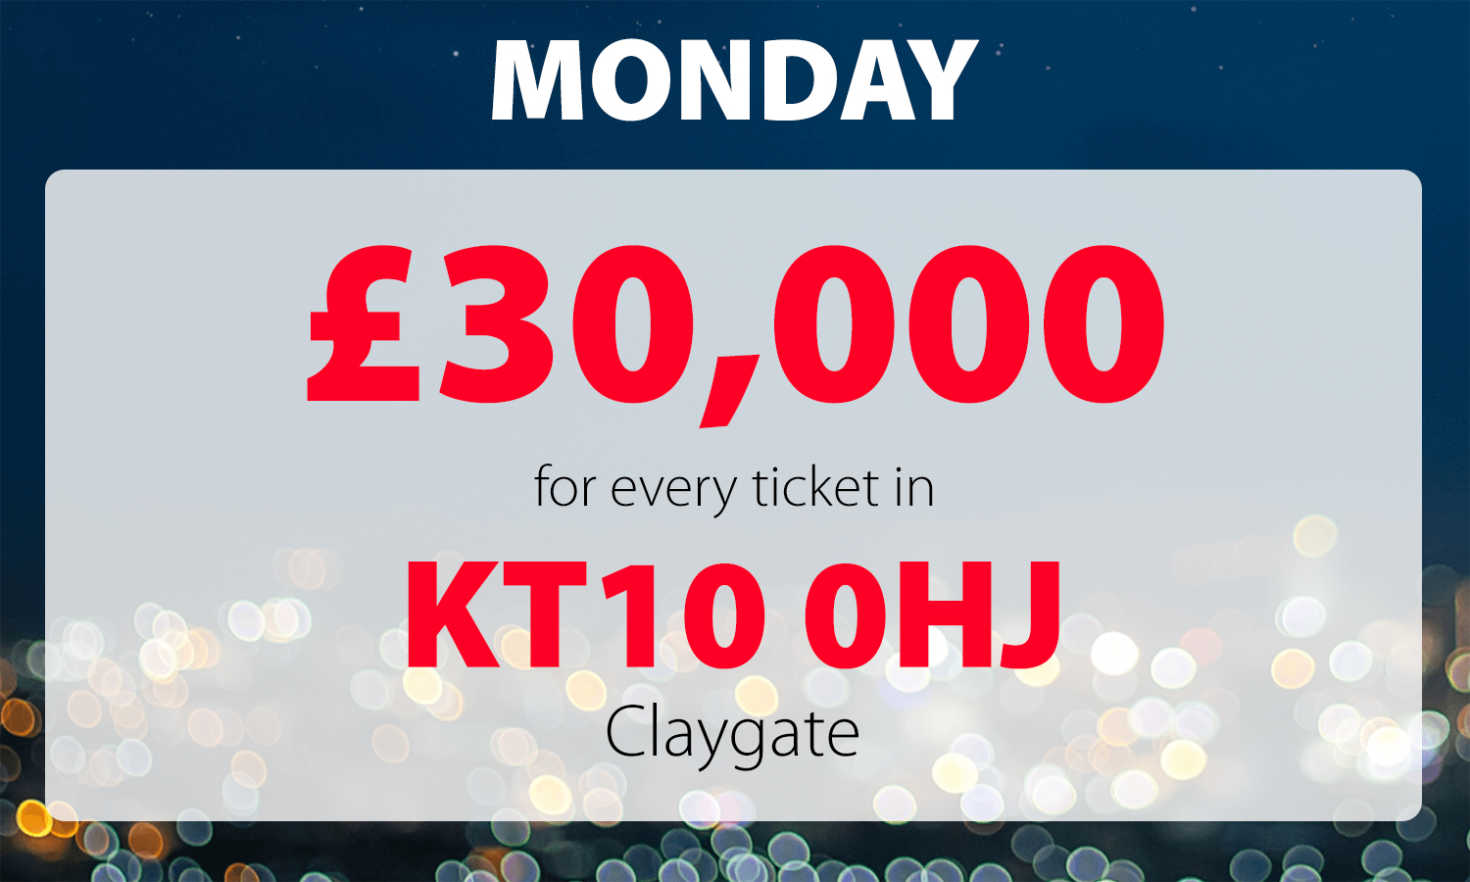 One lucky Claygate player has scooped a £30,000 prize